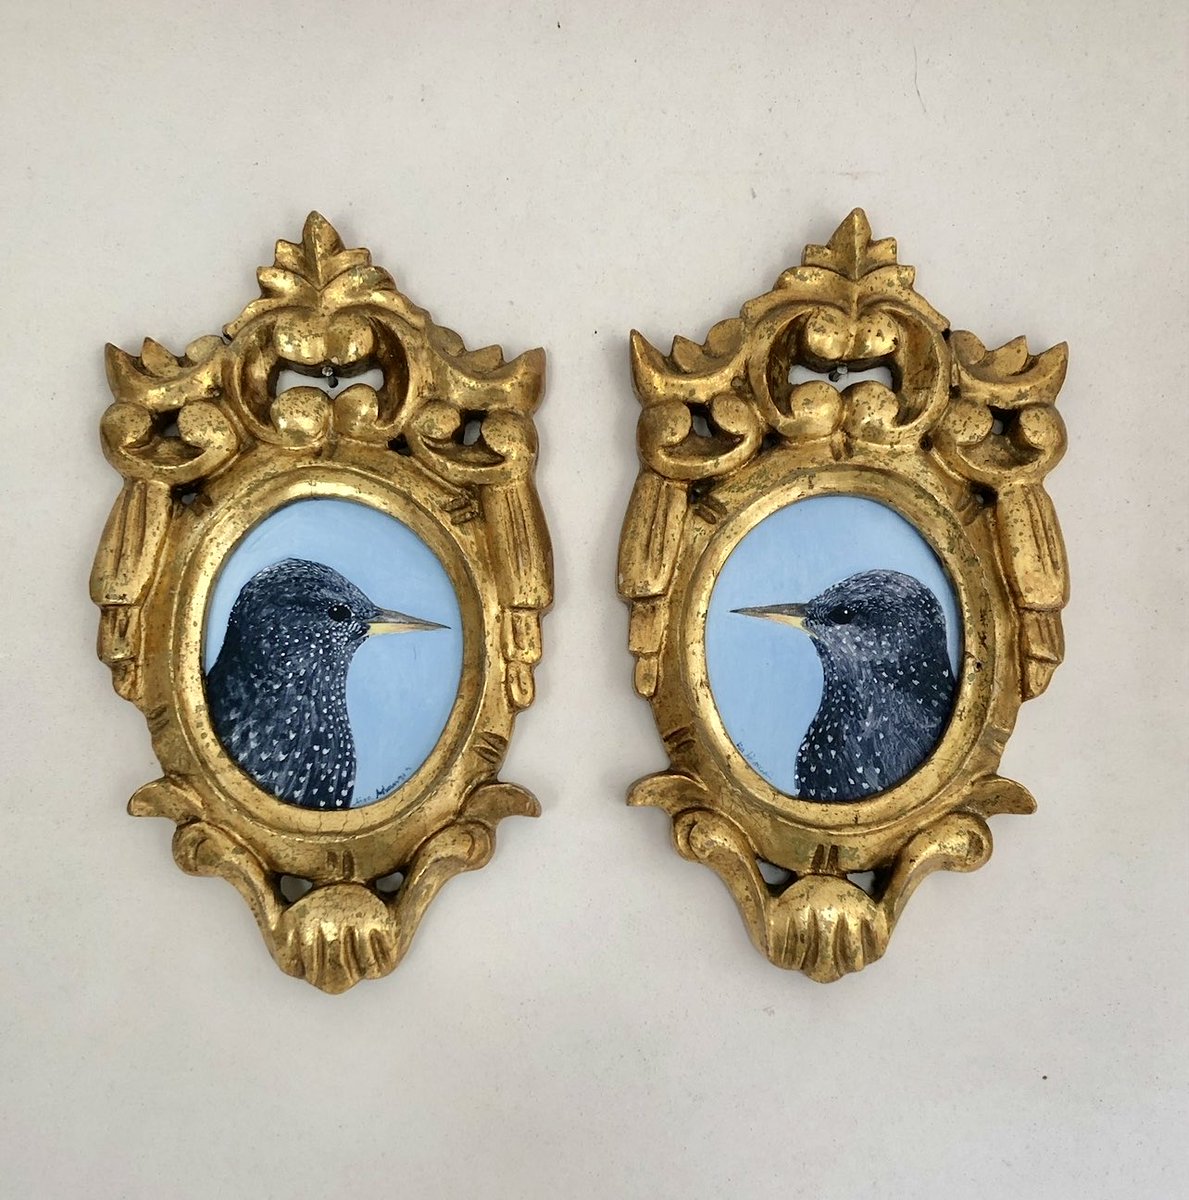 Available in tomorrow’s studio sale. Painted on wood panels in ornate carved vintage/antique gilt wood frames. A pair of starlings